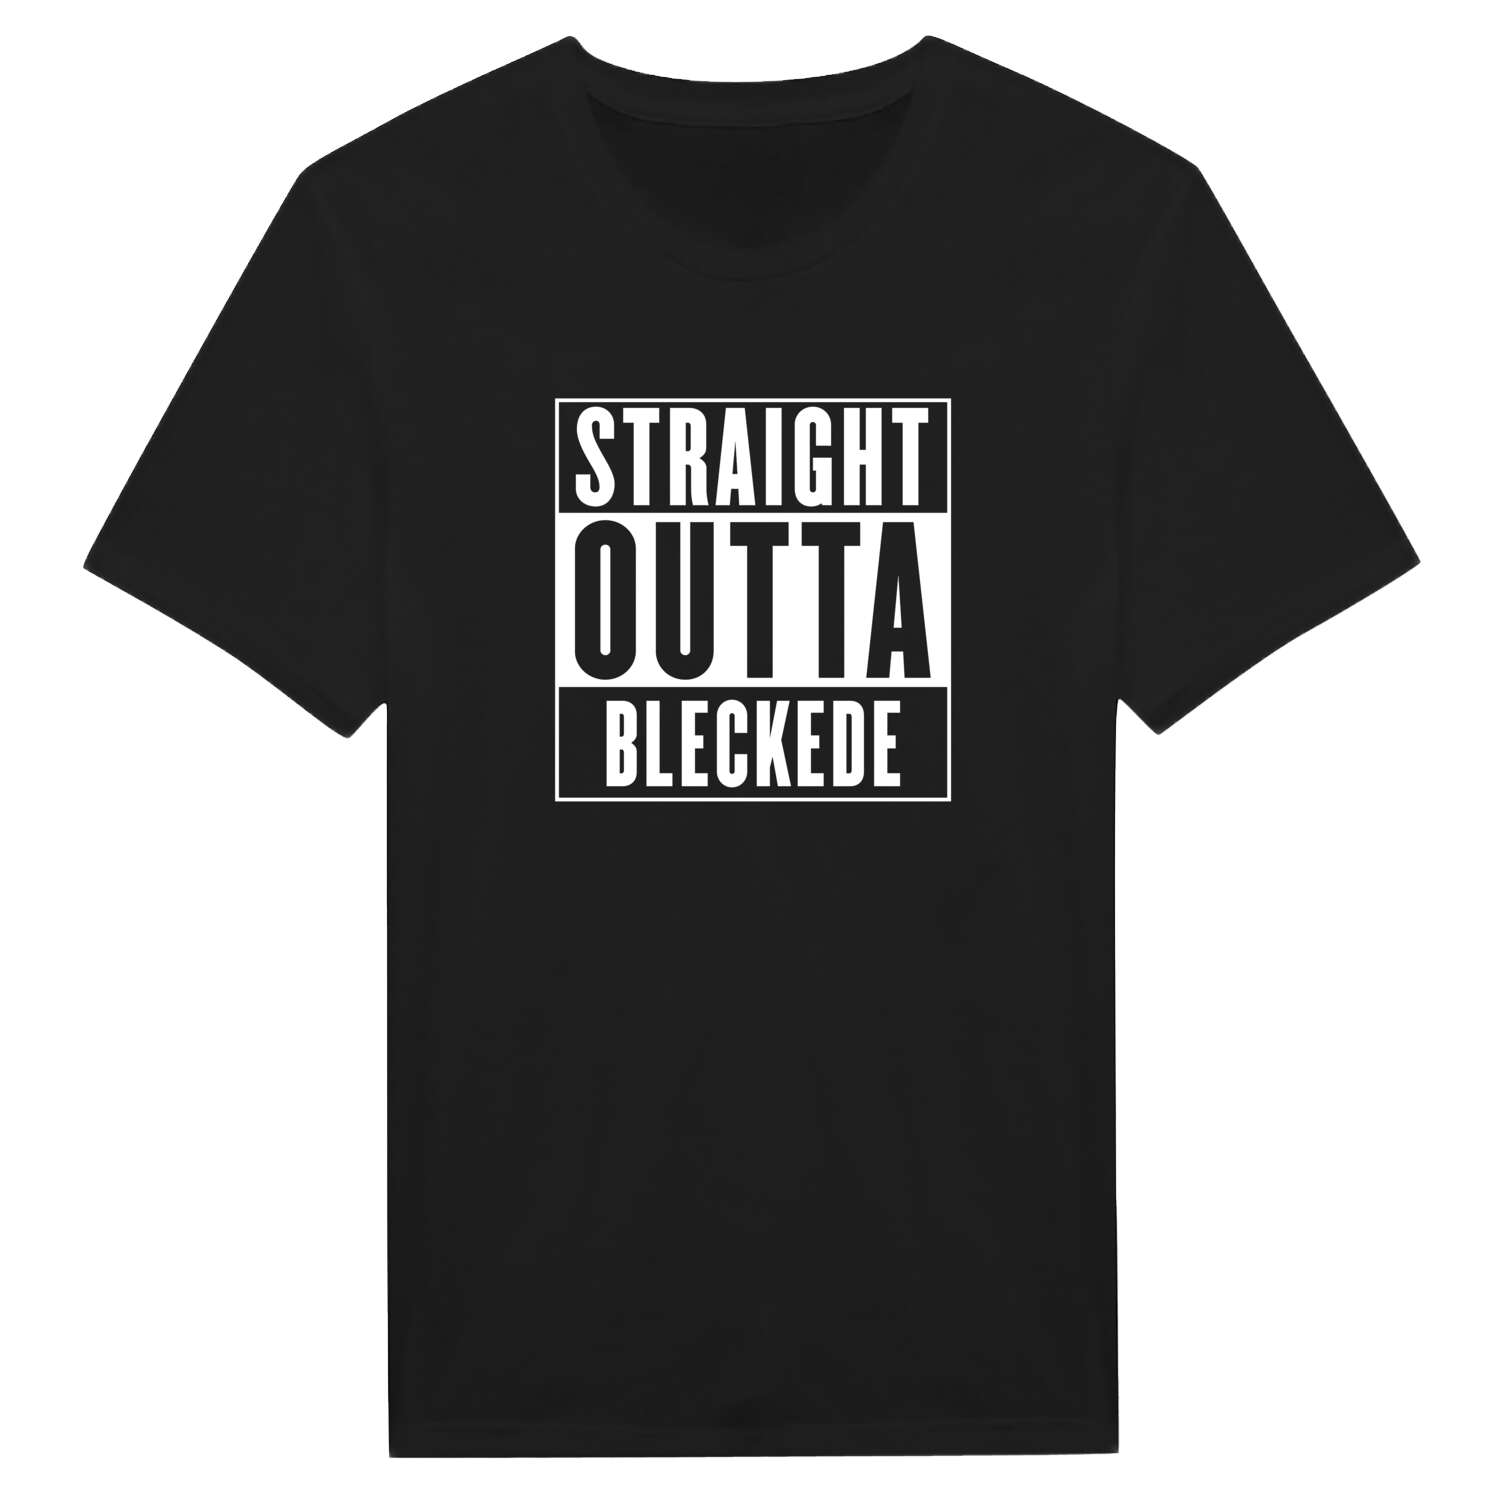 Bleckede T-Shirt »Straight Outta«